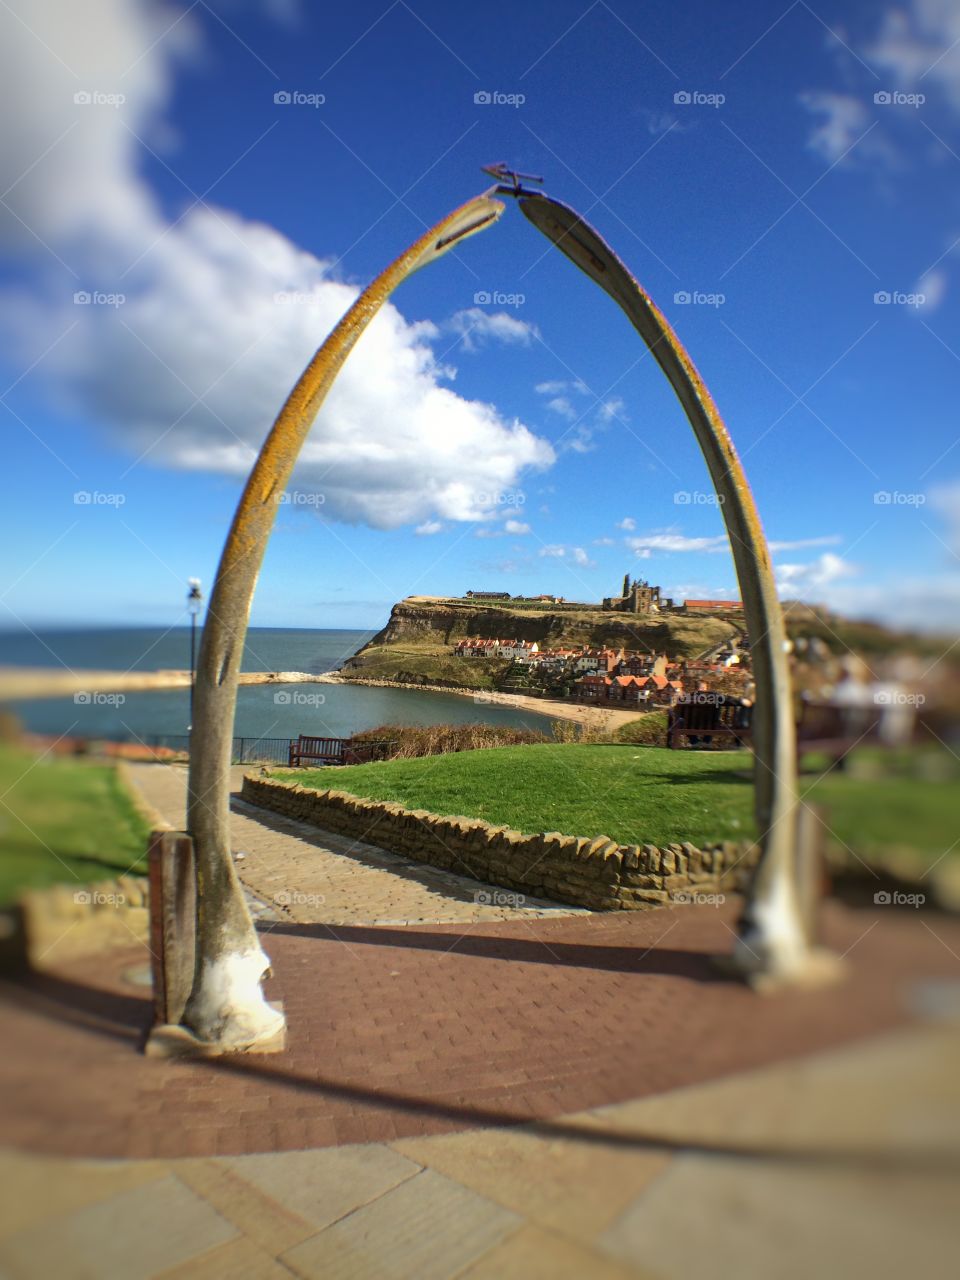 Whalebone View. Day trip to Whitby ... Photographing the cliff top view through the famous whalebone ...